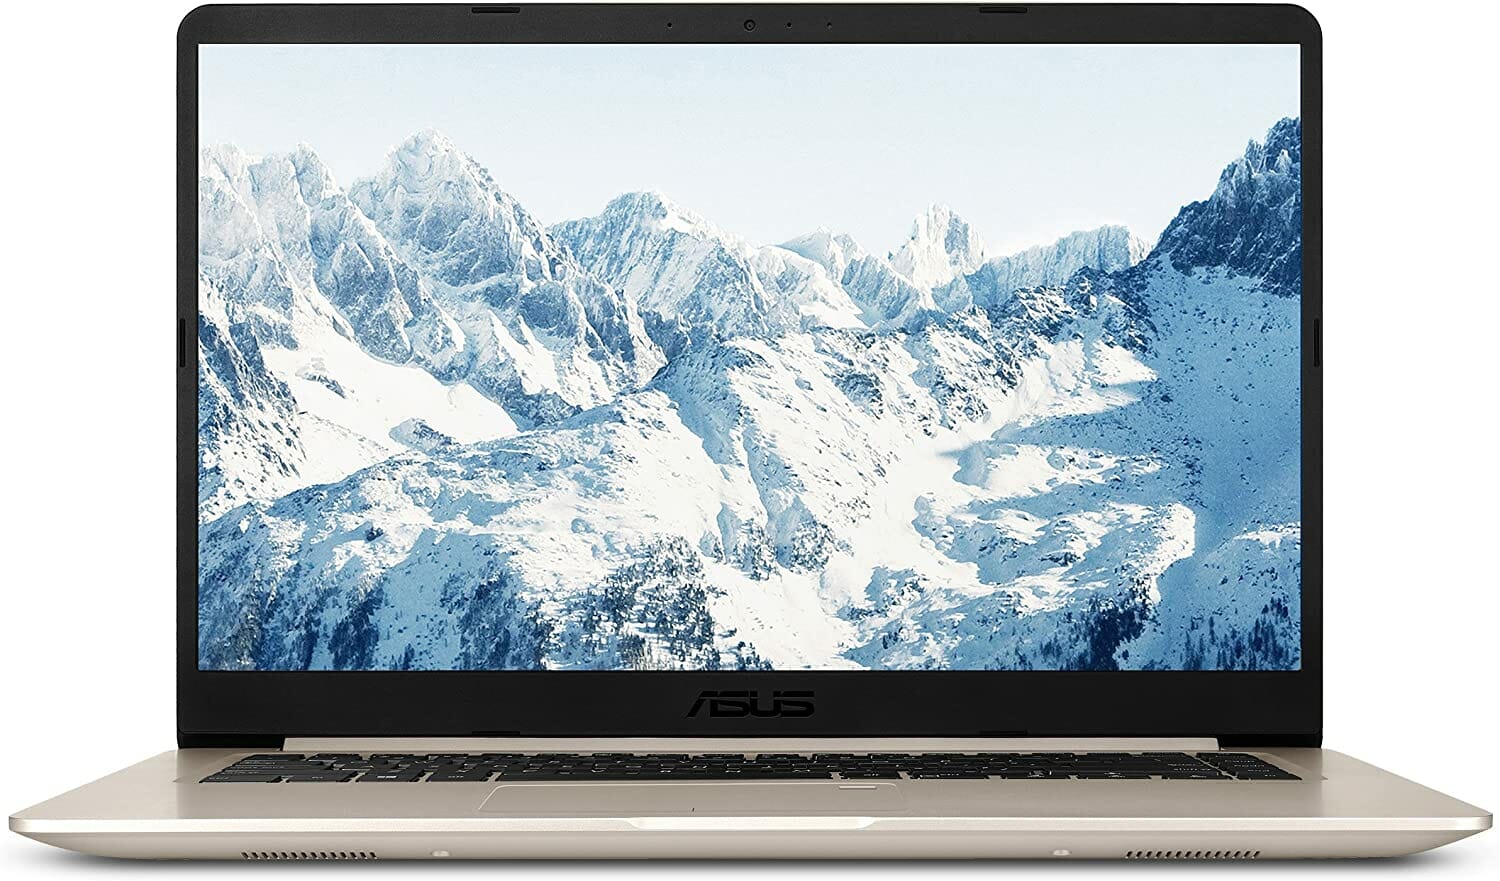  ASUS VivoBook S Ultra Thin and Portable Laptop